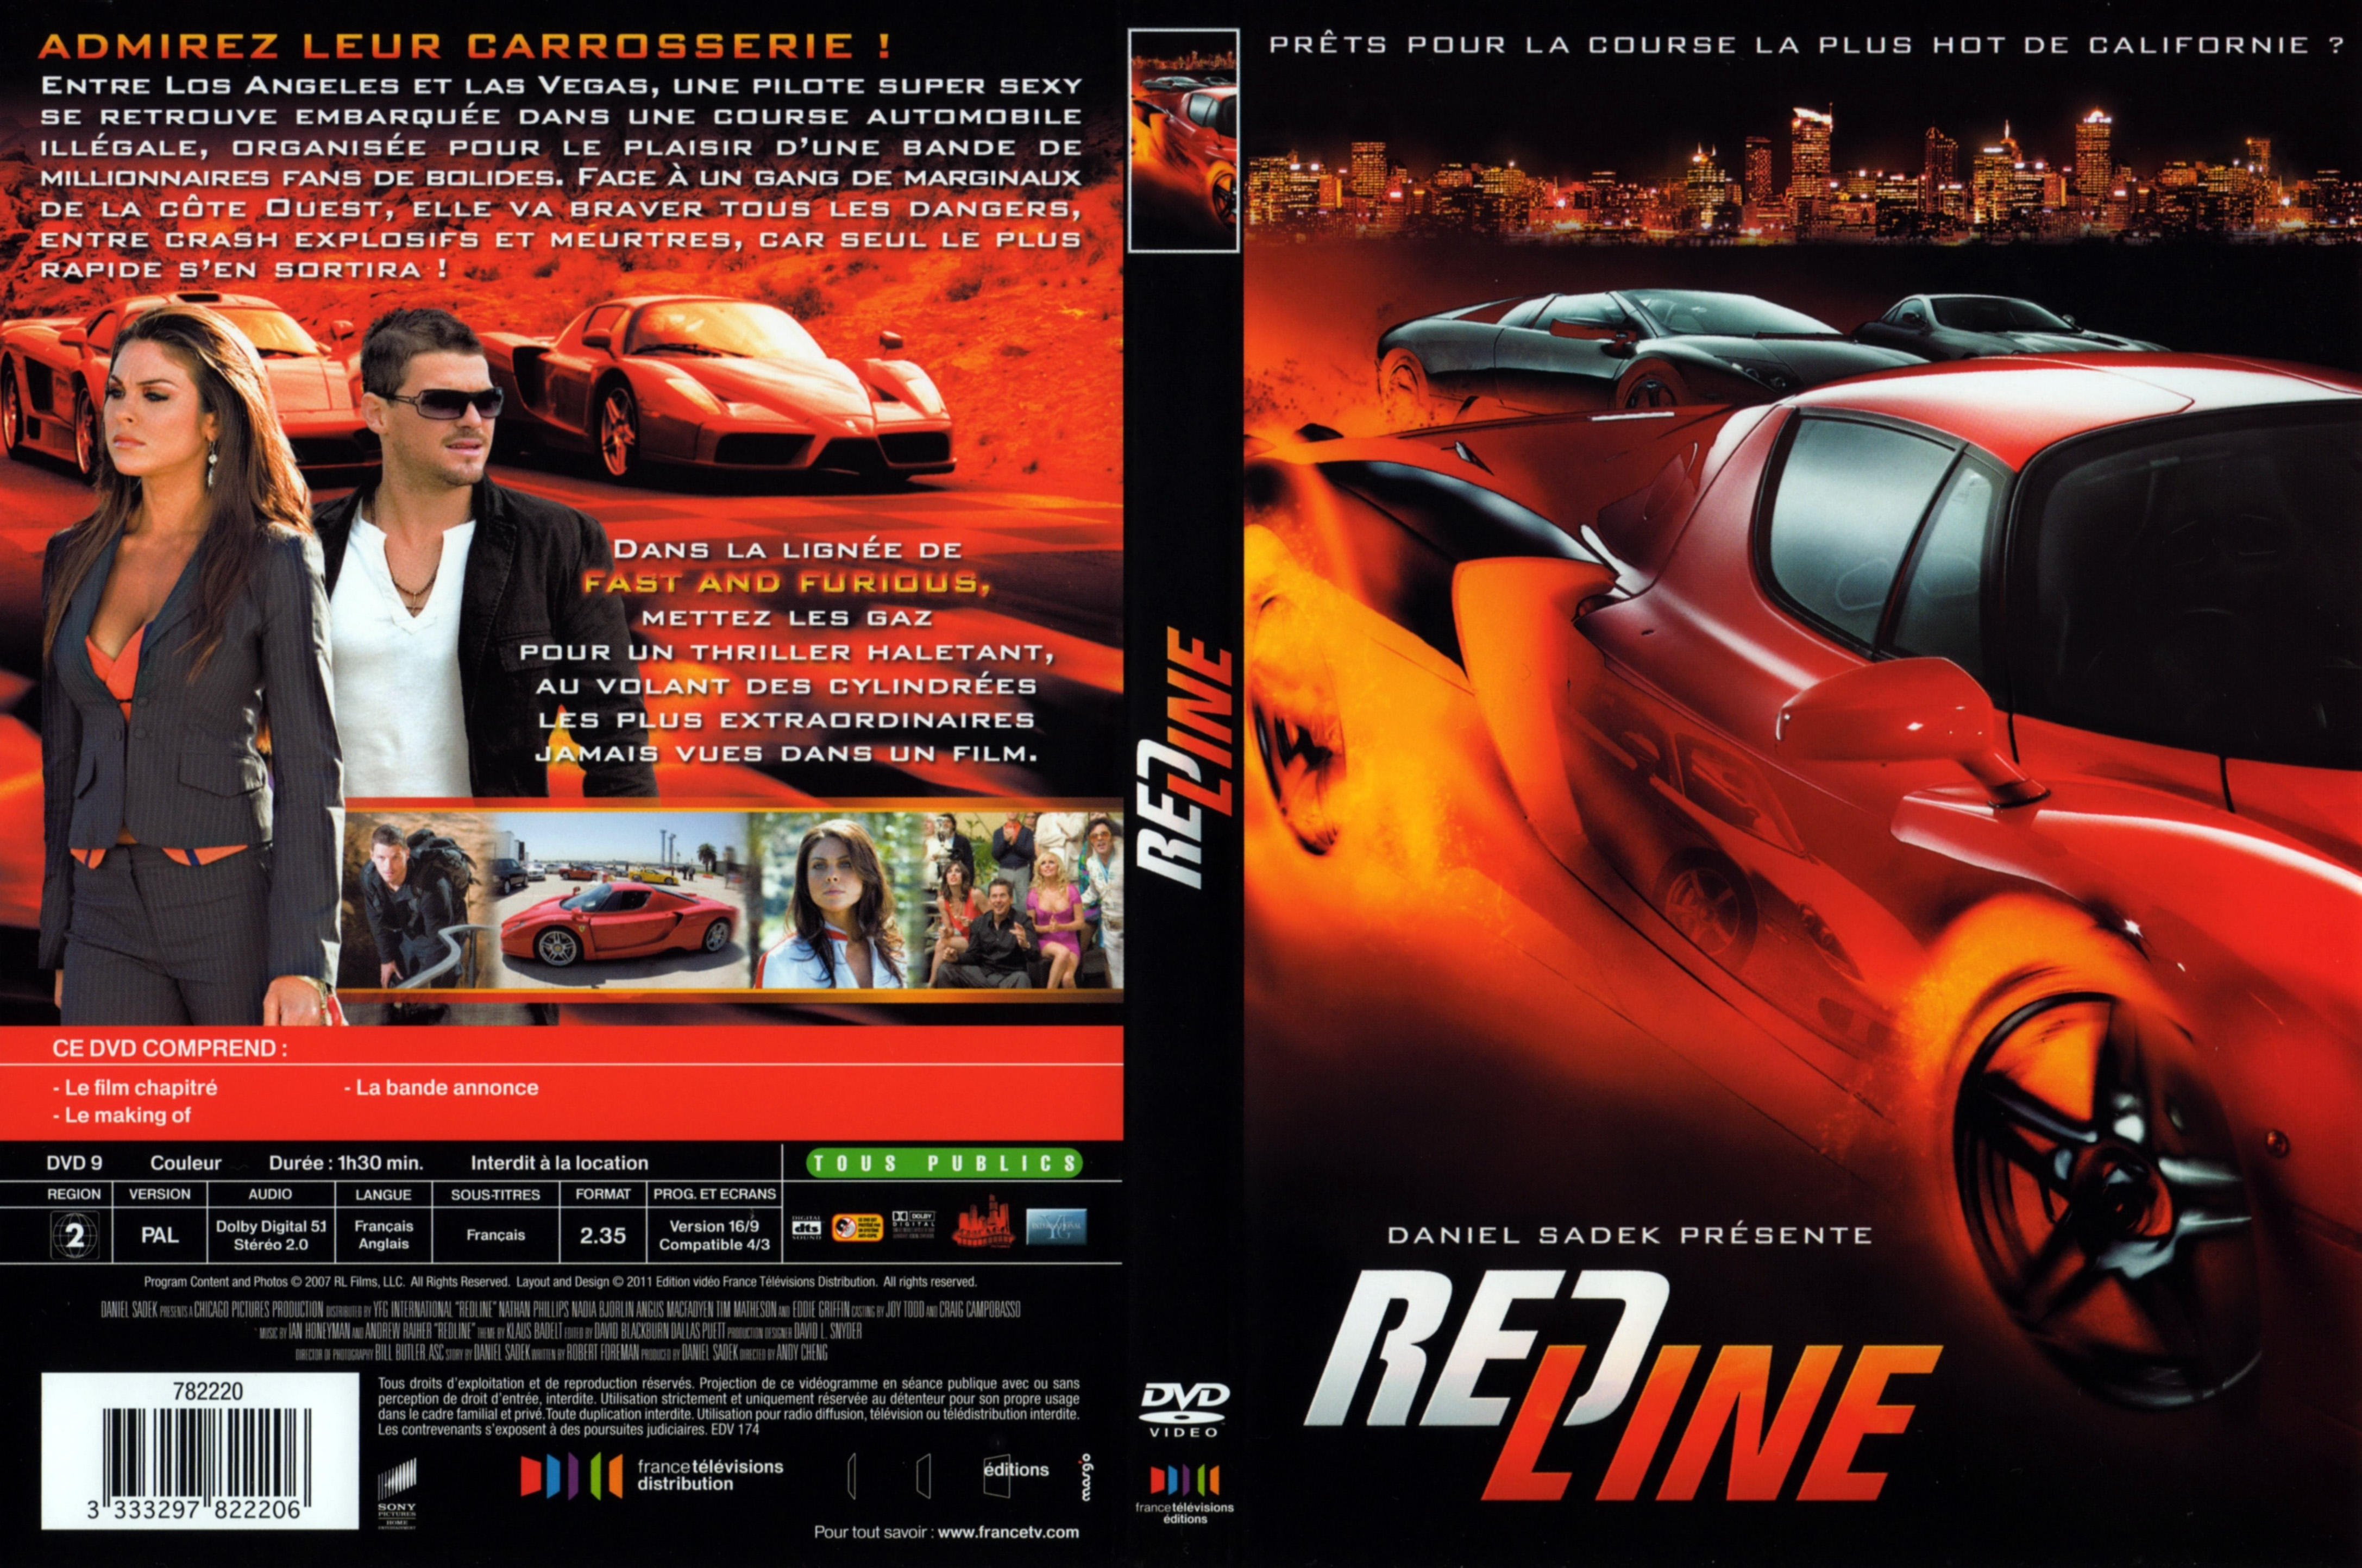 Jaquette DVD Red line (2007)